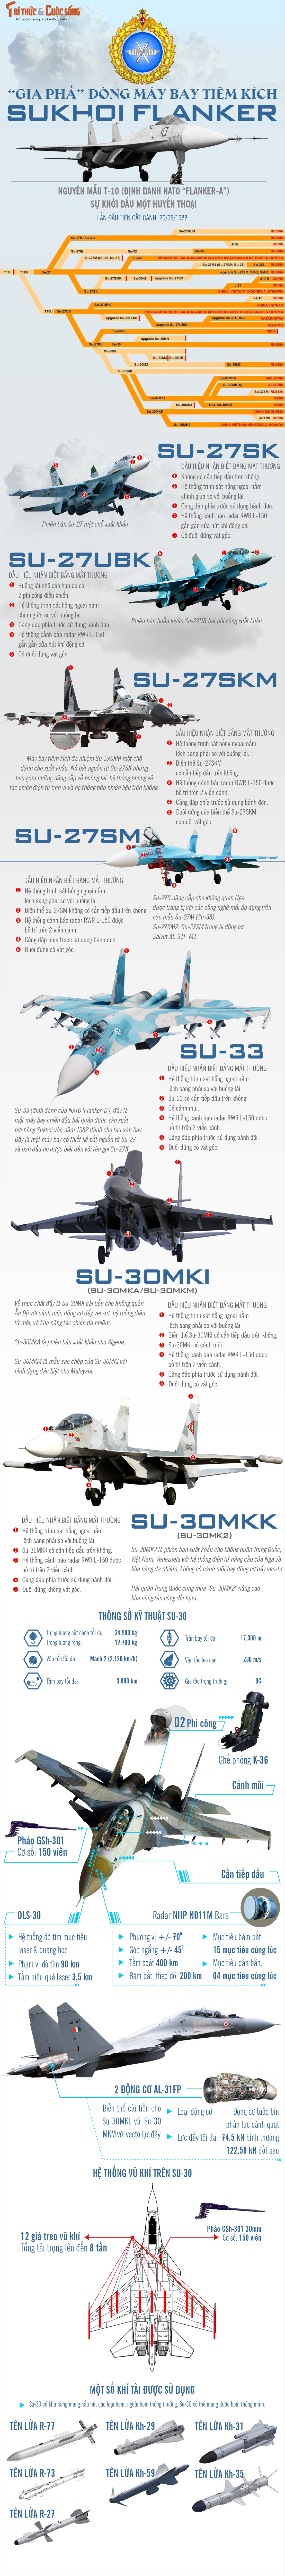 Infographic: Suc manh cua “gia toc” may bay tiem kich Sukhoi Flanker-Hinh-2